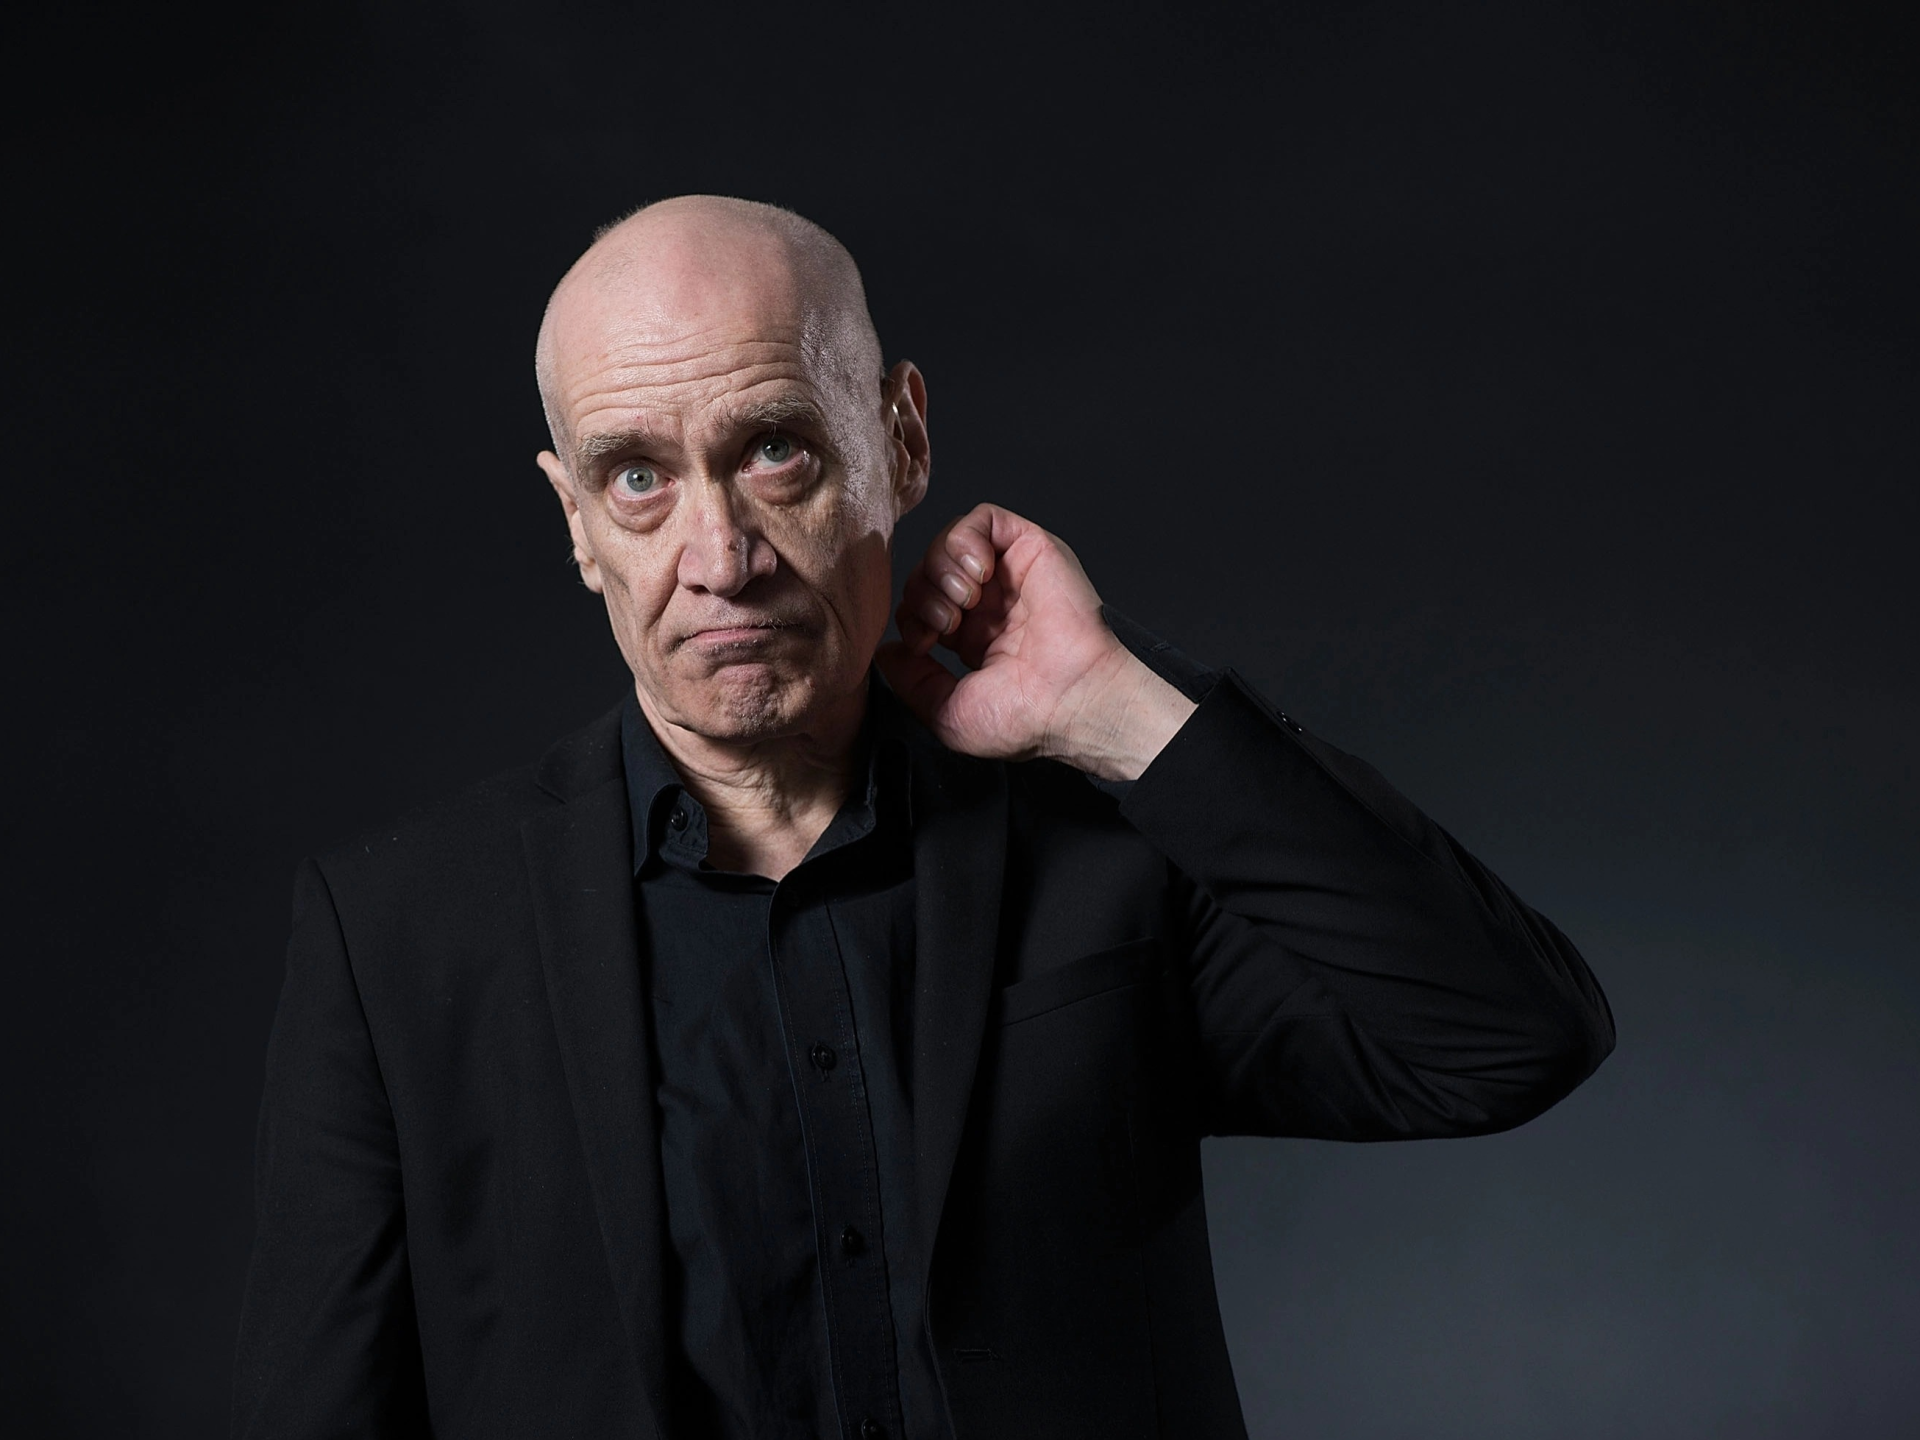 Wilko Johnson Biography, Wikipedia, Family, Networth, Career, Songs, Game Of Throne Character, Cause Of Death